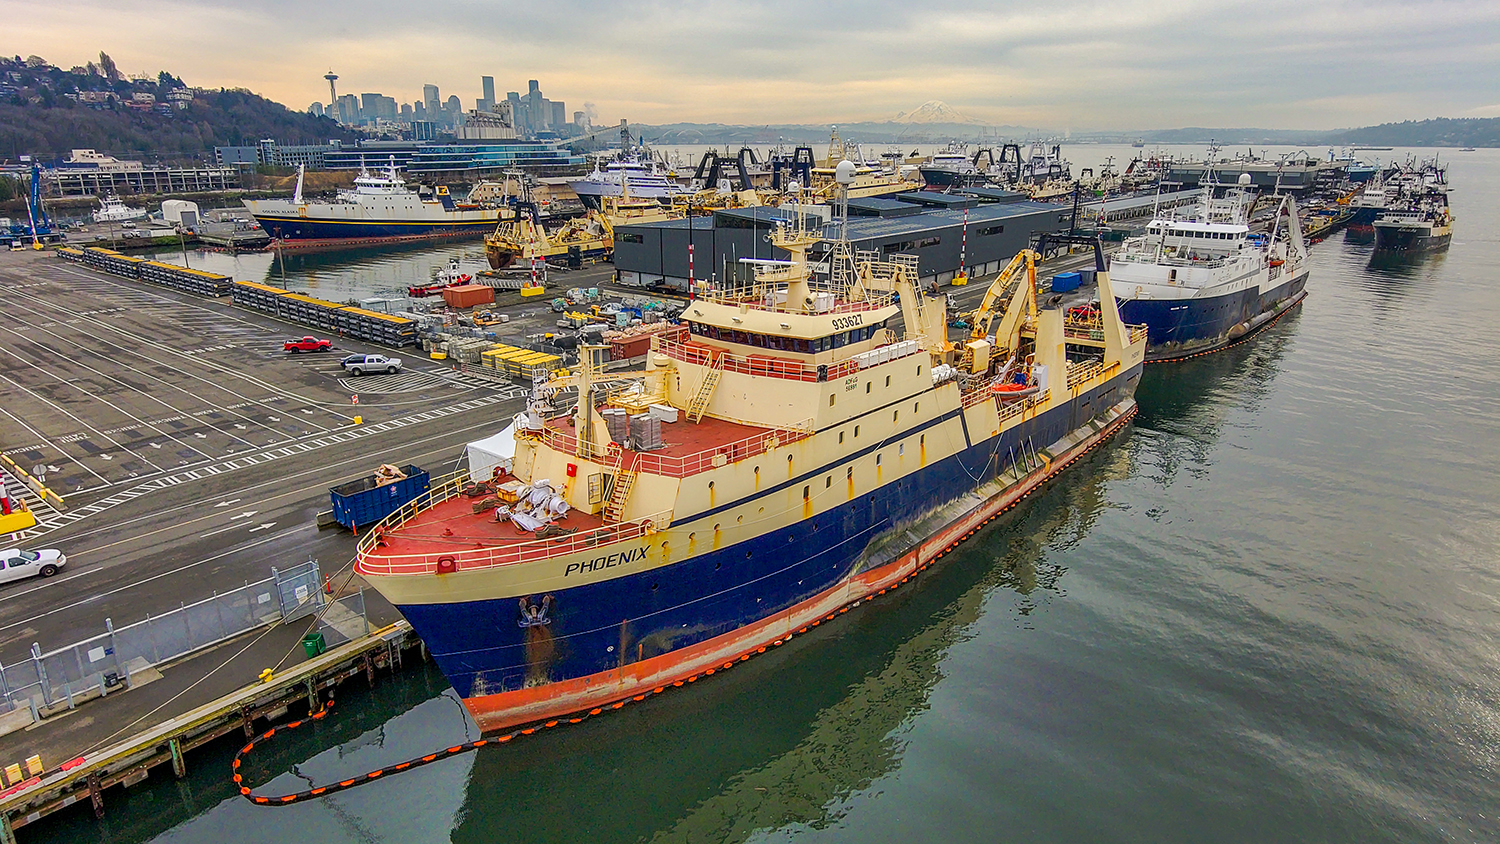 All About the Fishing Fleet at Terminal 91